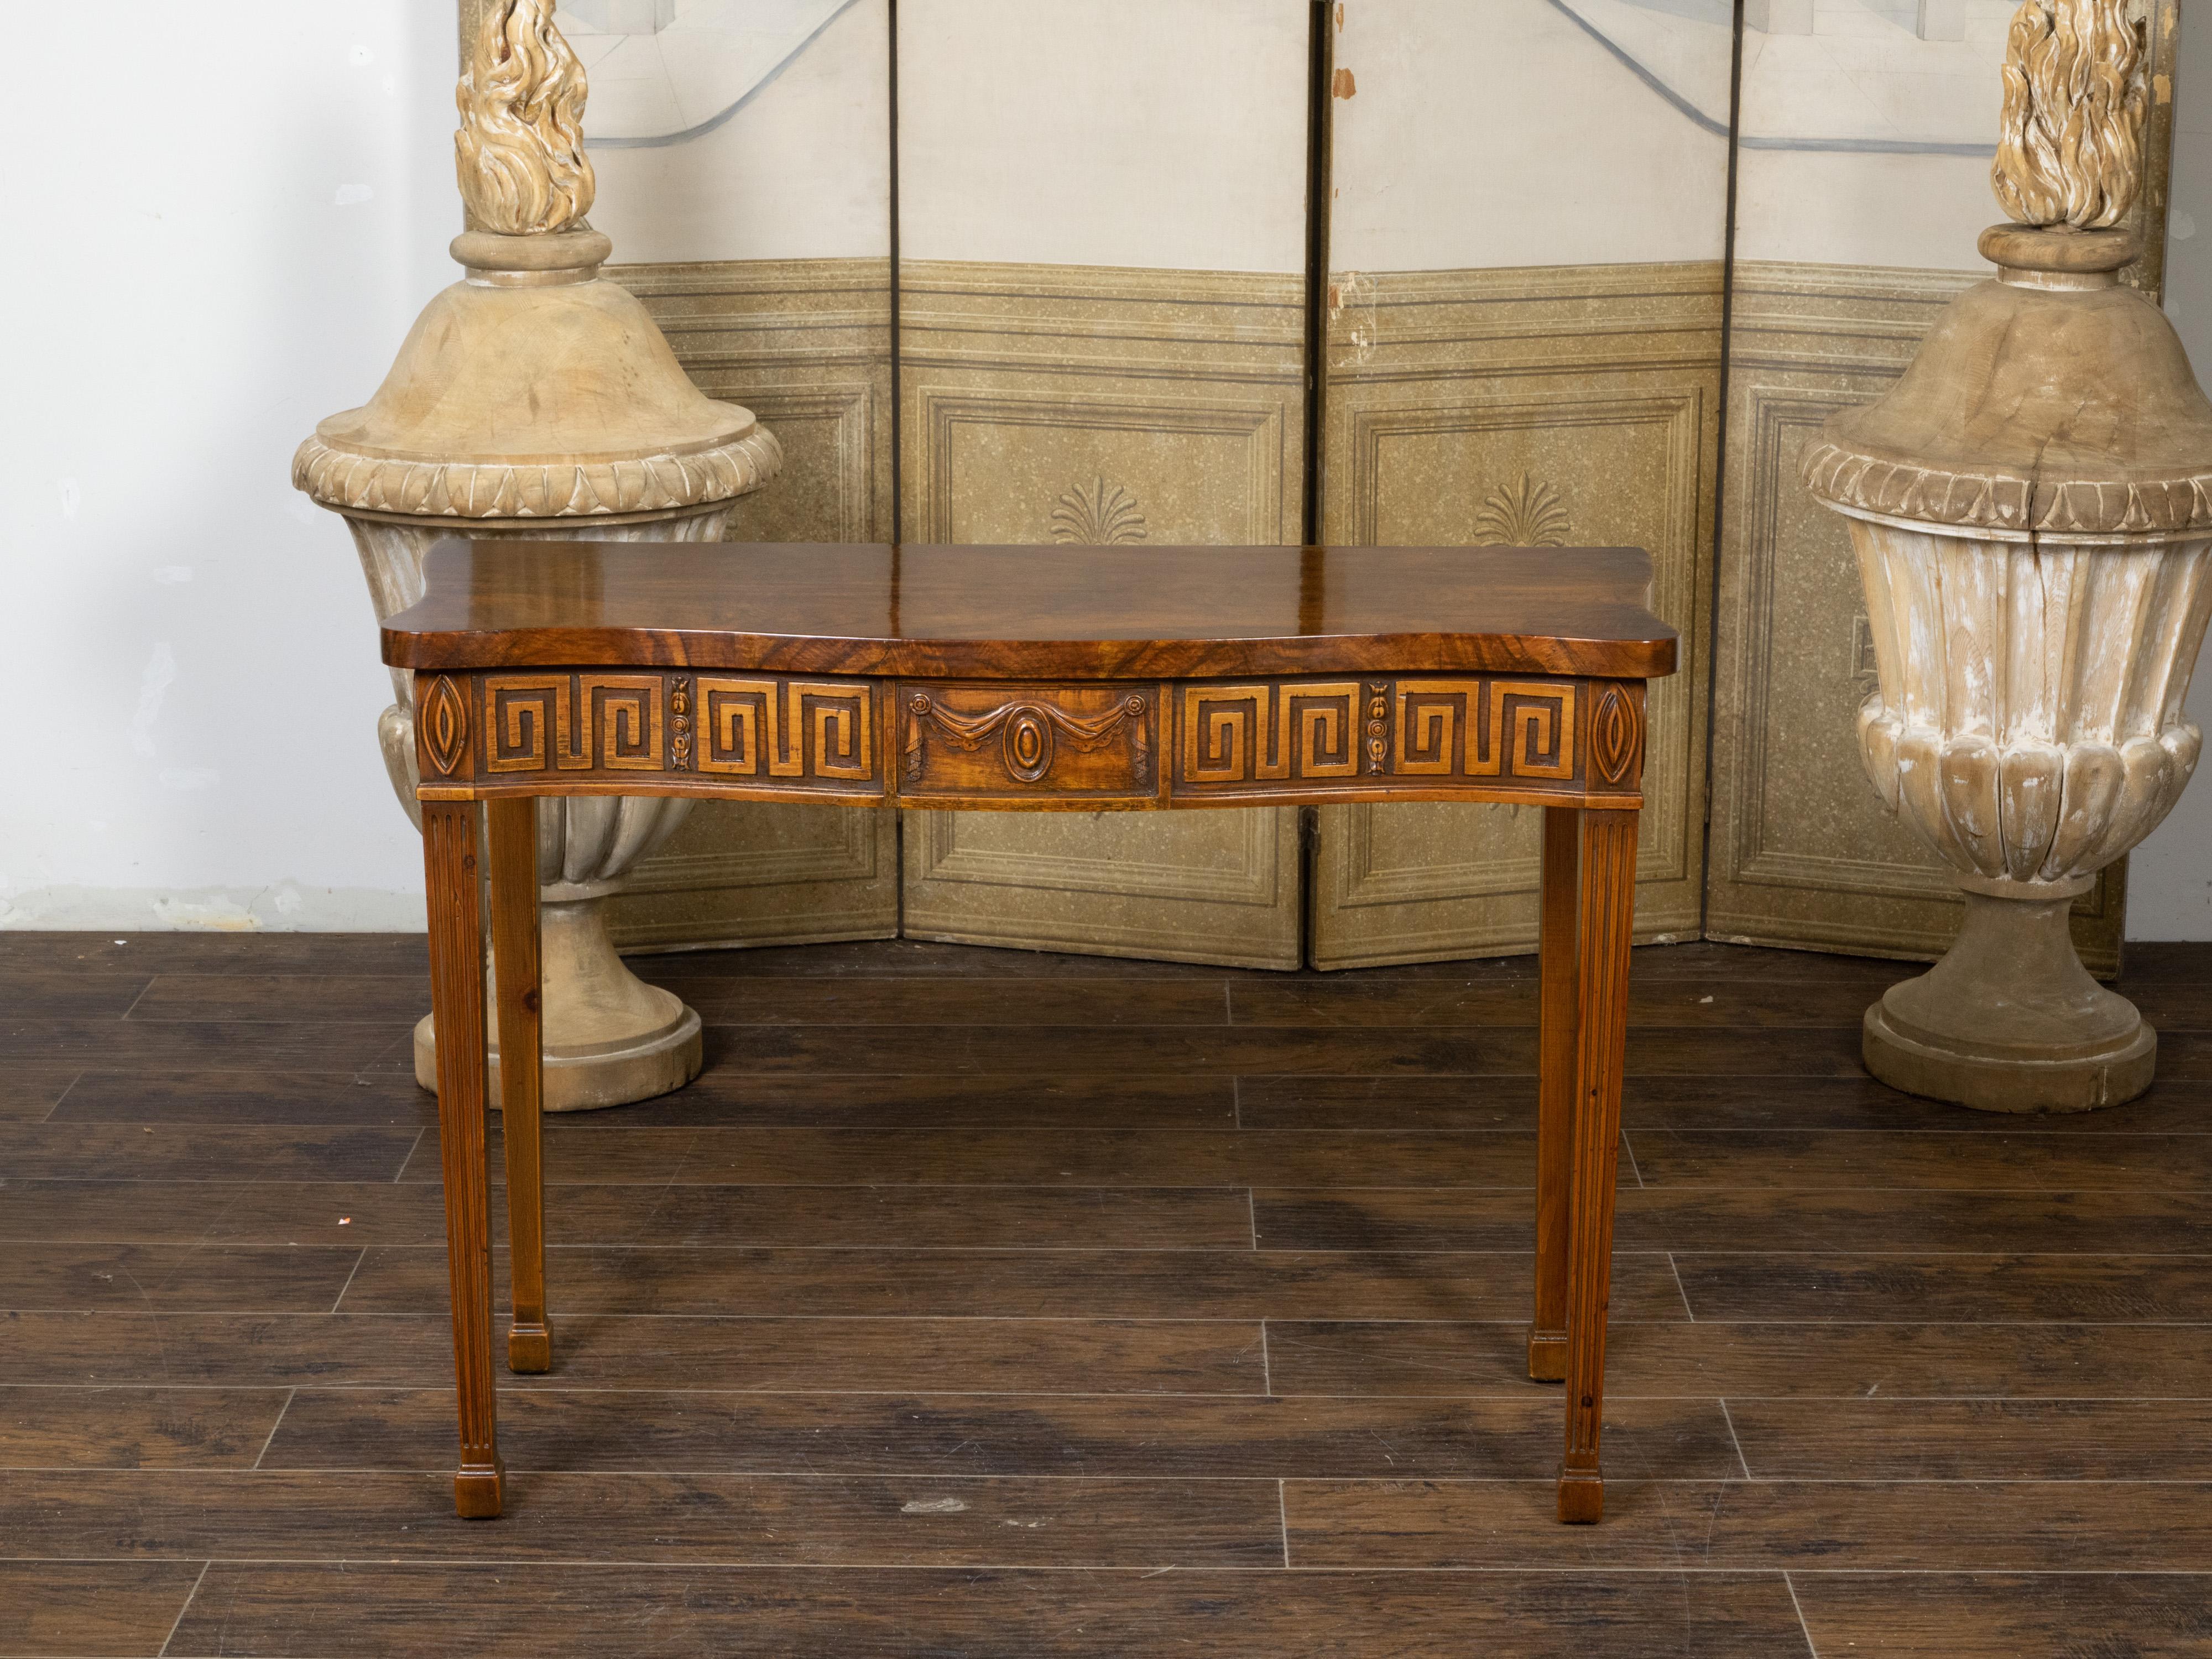 An English Neoclassical Revival mahogany console table from the 19th century, with carved apron depicting a Greek Key frieze and a draped oval medallion. Created in England during the 19th century, this console table features a serpentine top